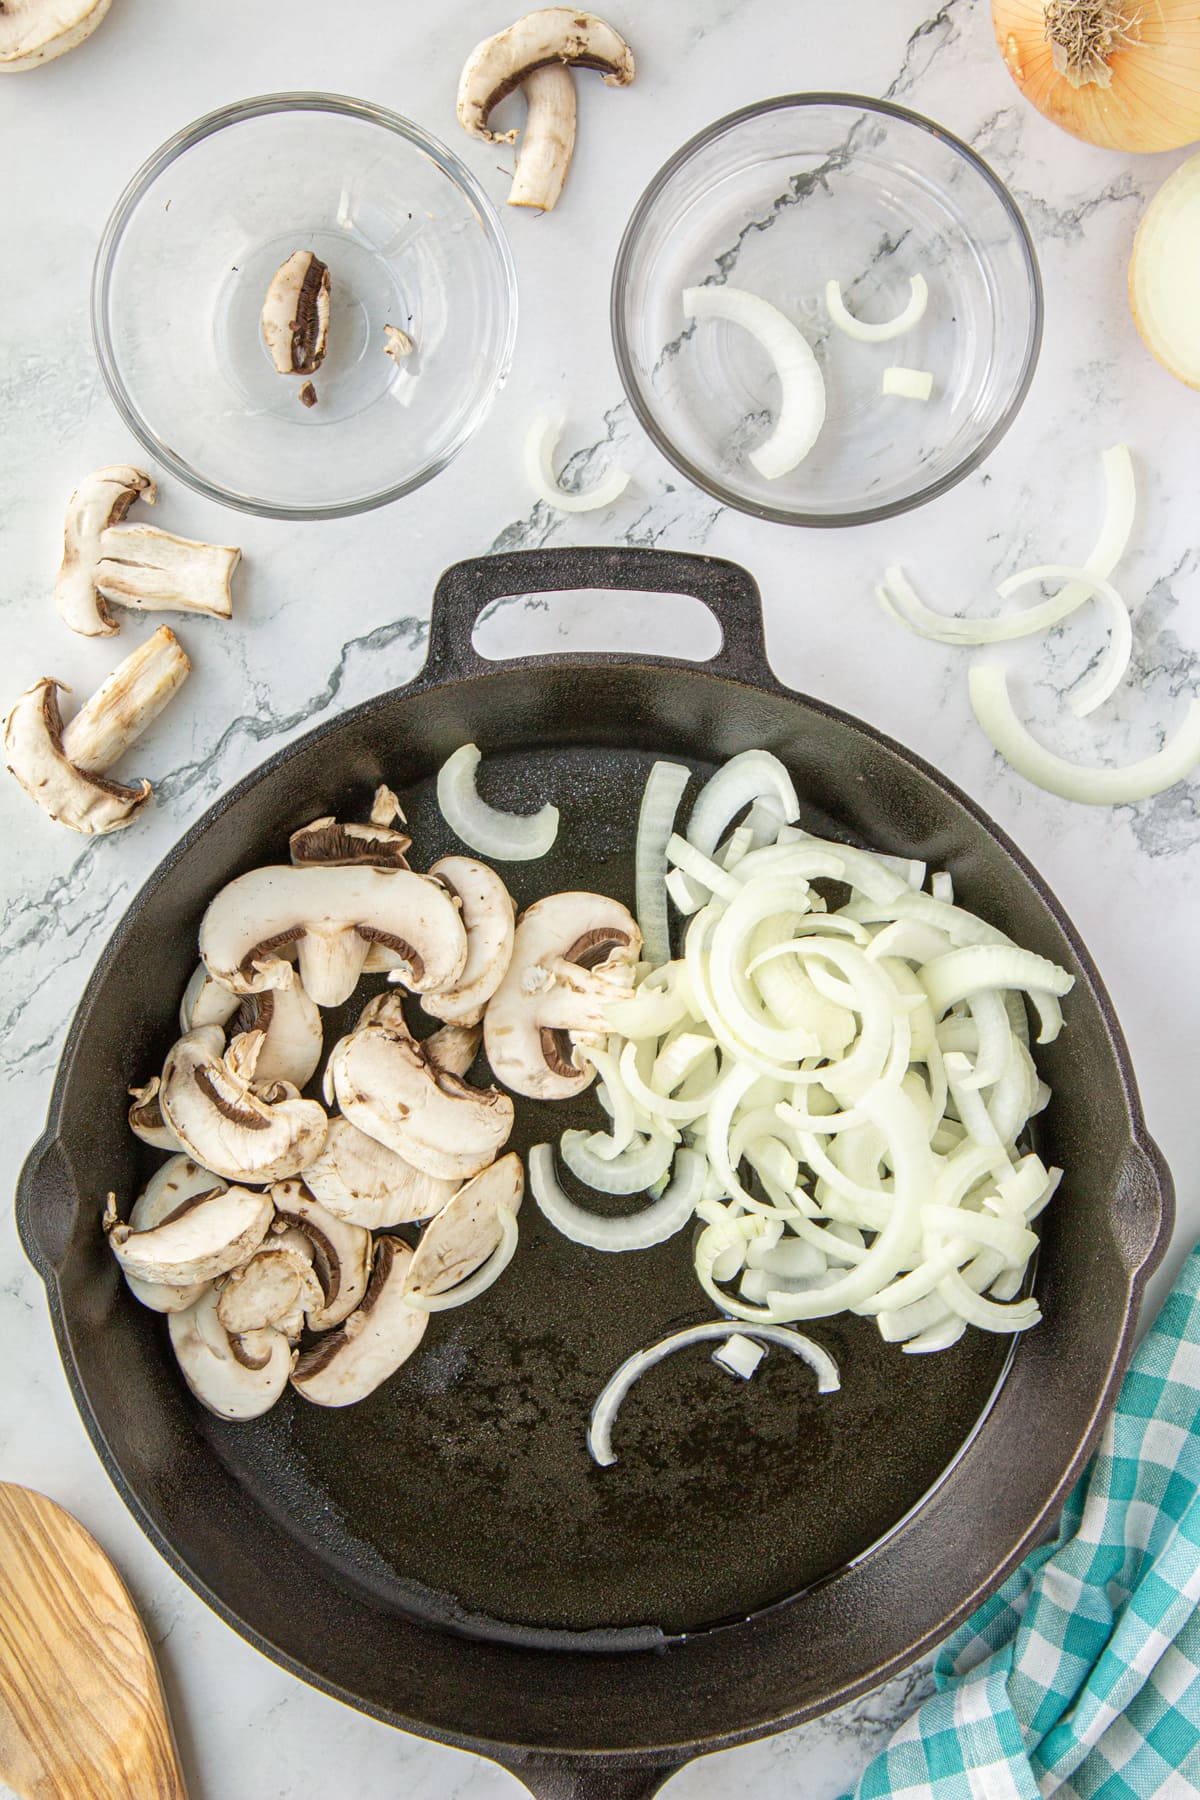 Chopped mushrooms and sliced onions in a skillet.